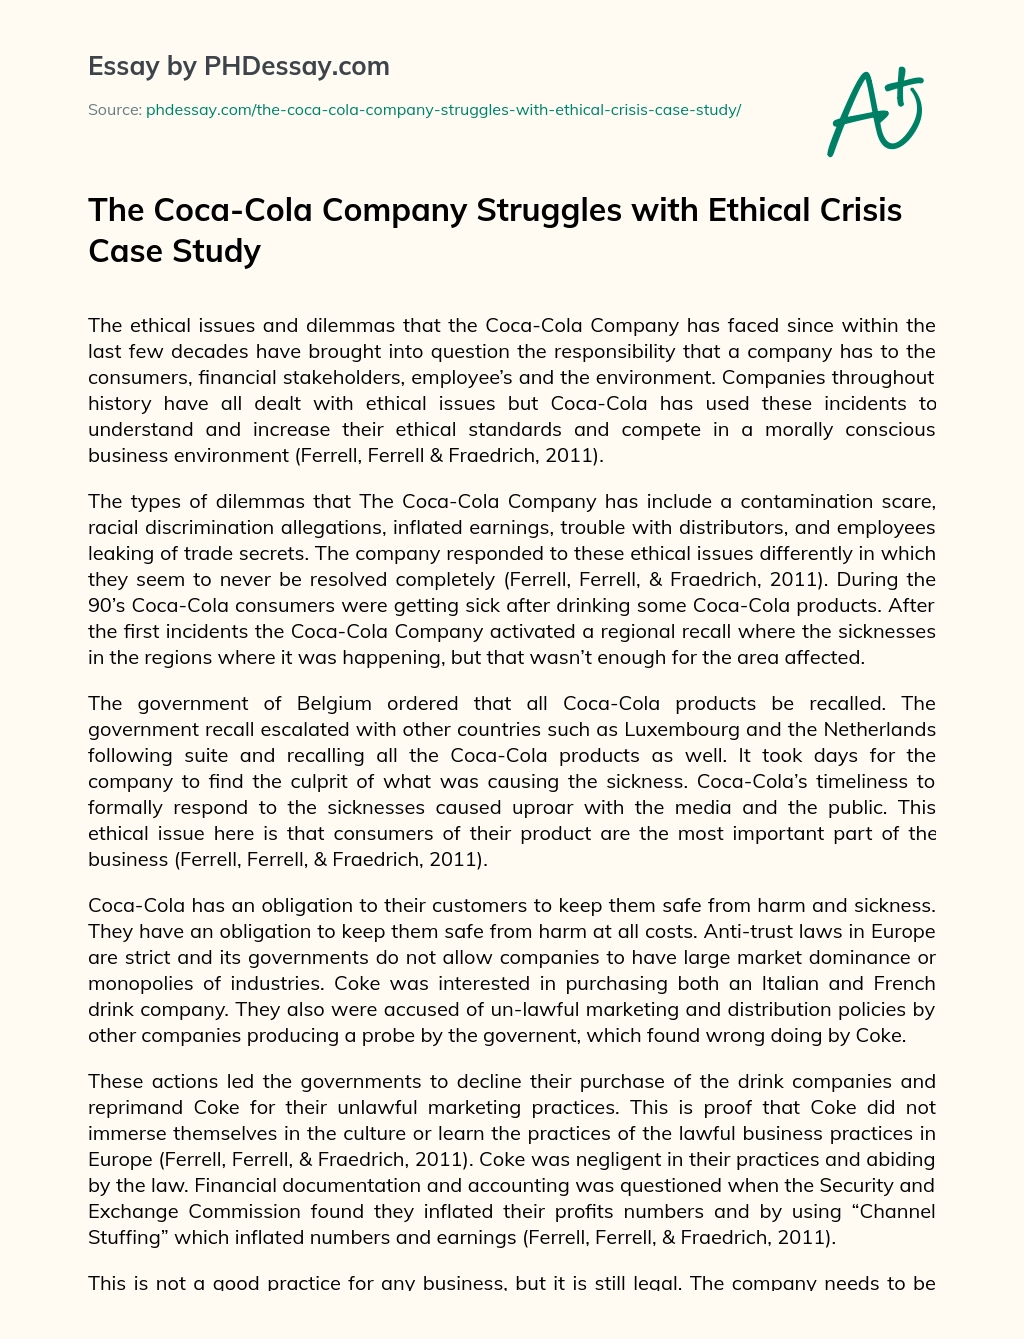 The Coca-Cola Company Struggles with Ethical Crisis Case Study essay